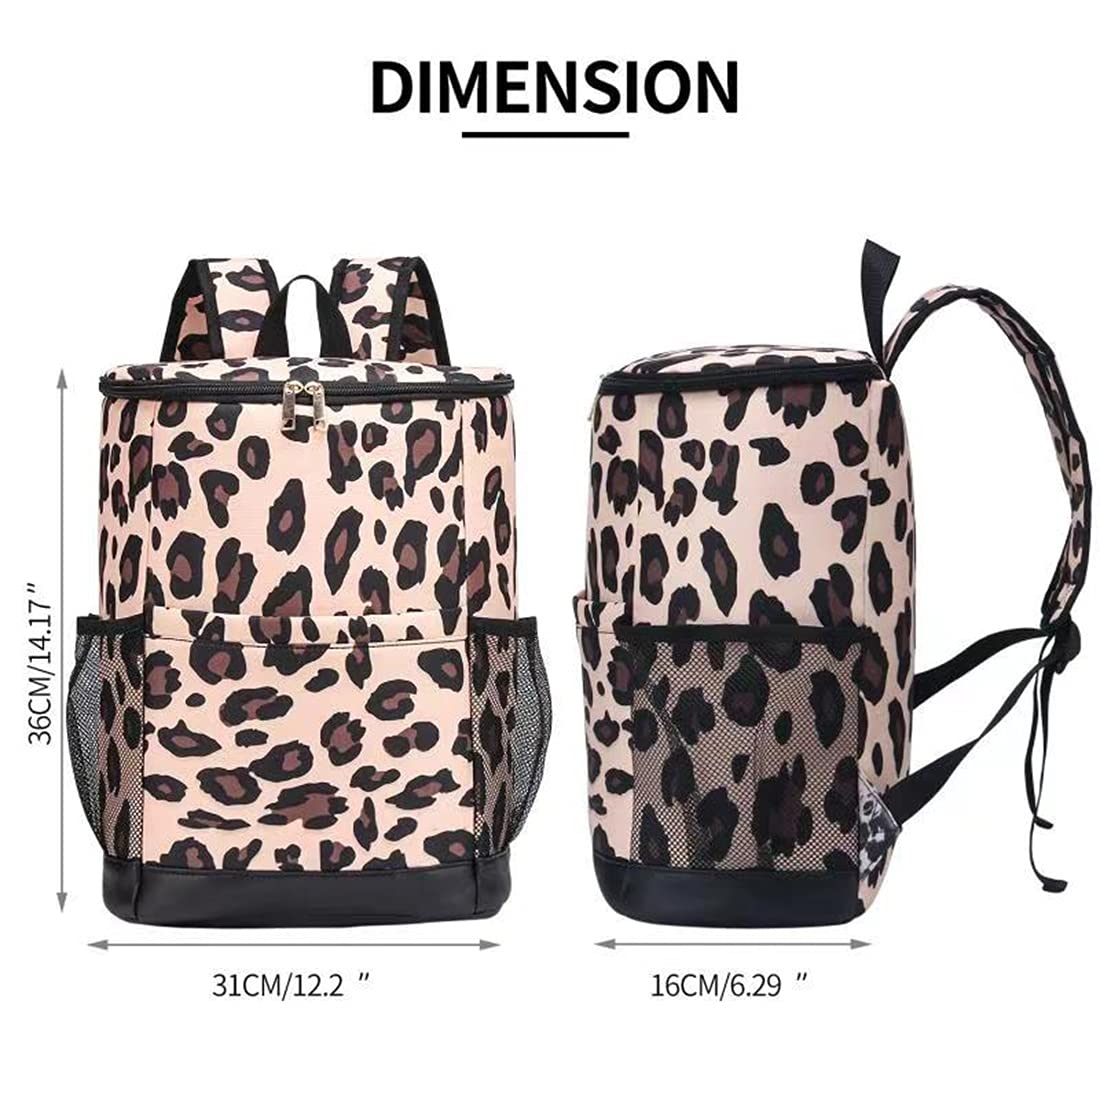 Leopard Cooler Bags Reusable Insulated Cooler Bags Large Portable Cooler Bag Lunch Box for Camping picnics, Lawn Party, Beach Vacations, Travel